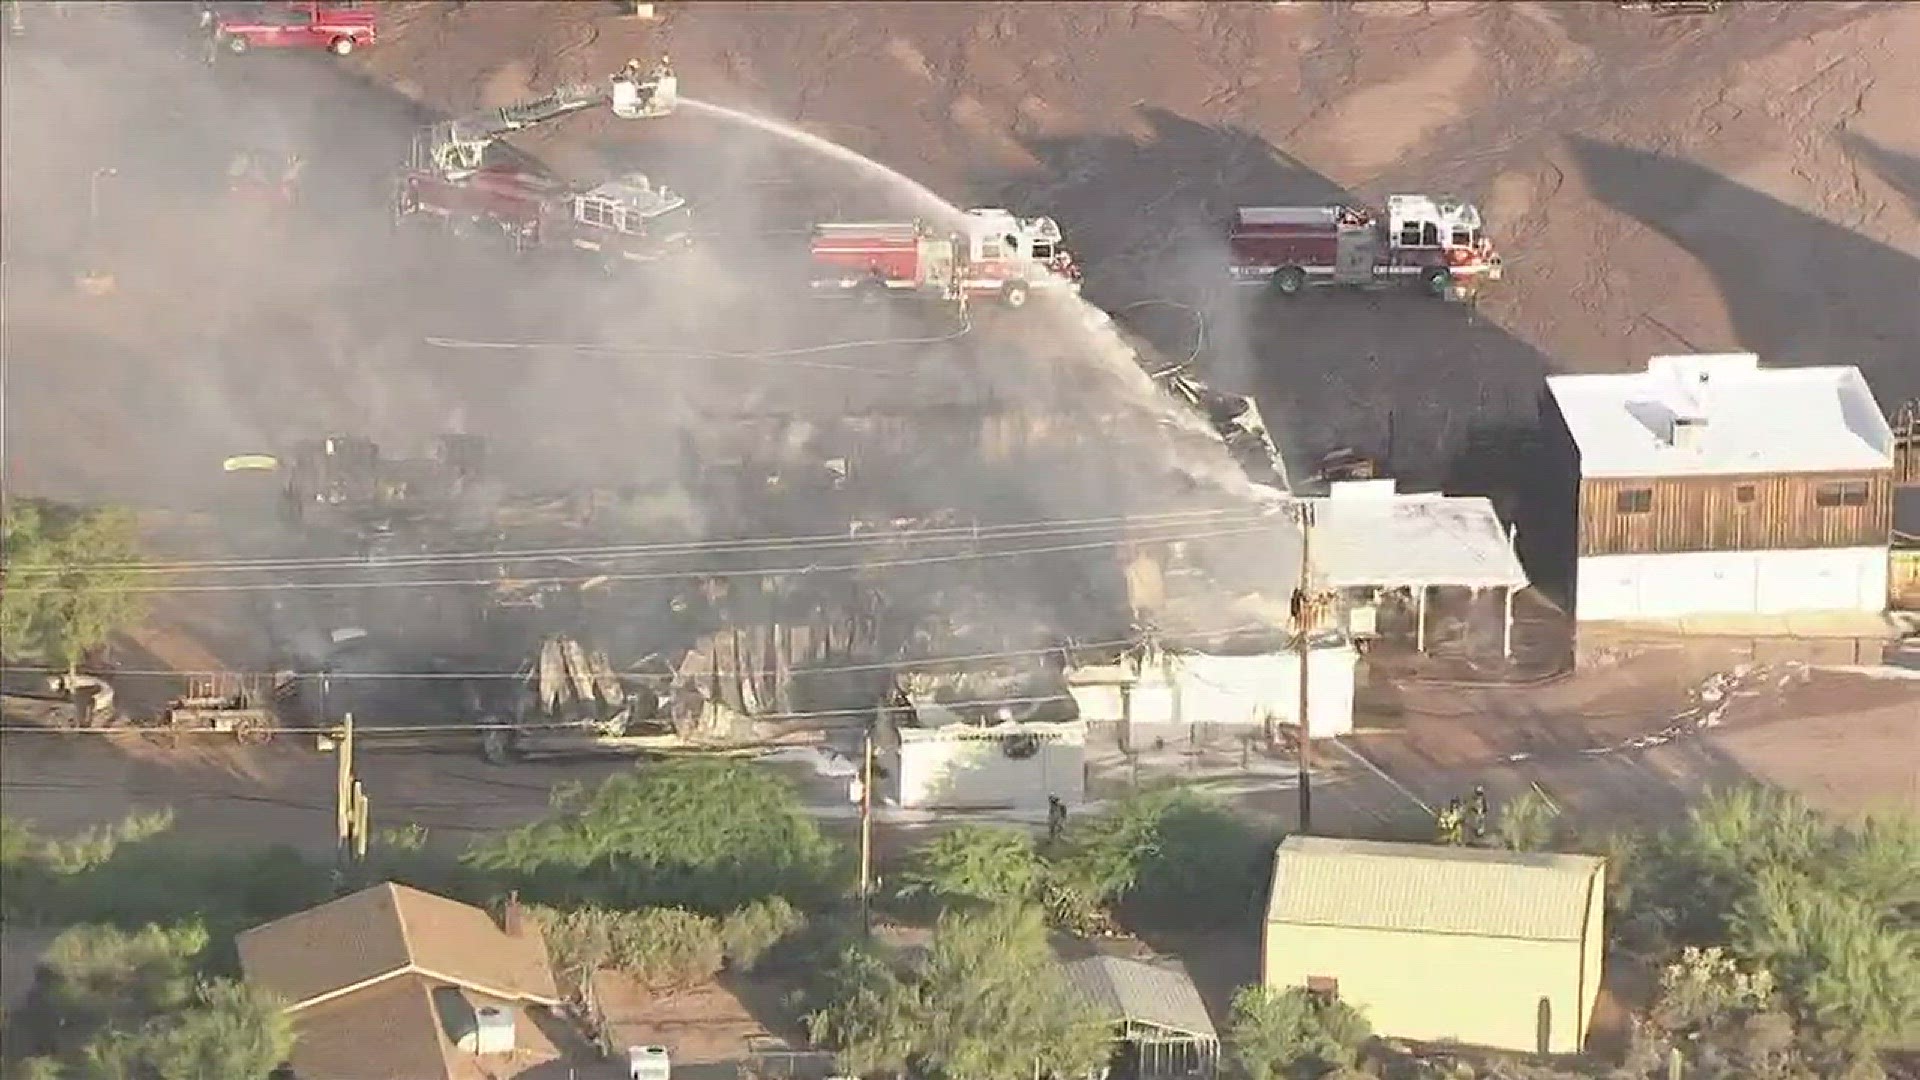 Fire crews battled flames that destroyed the Historic Mining Camp restaurant in Apache Junction.